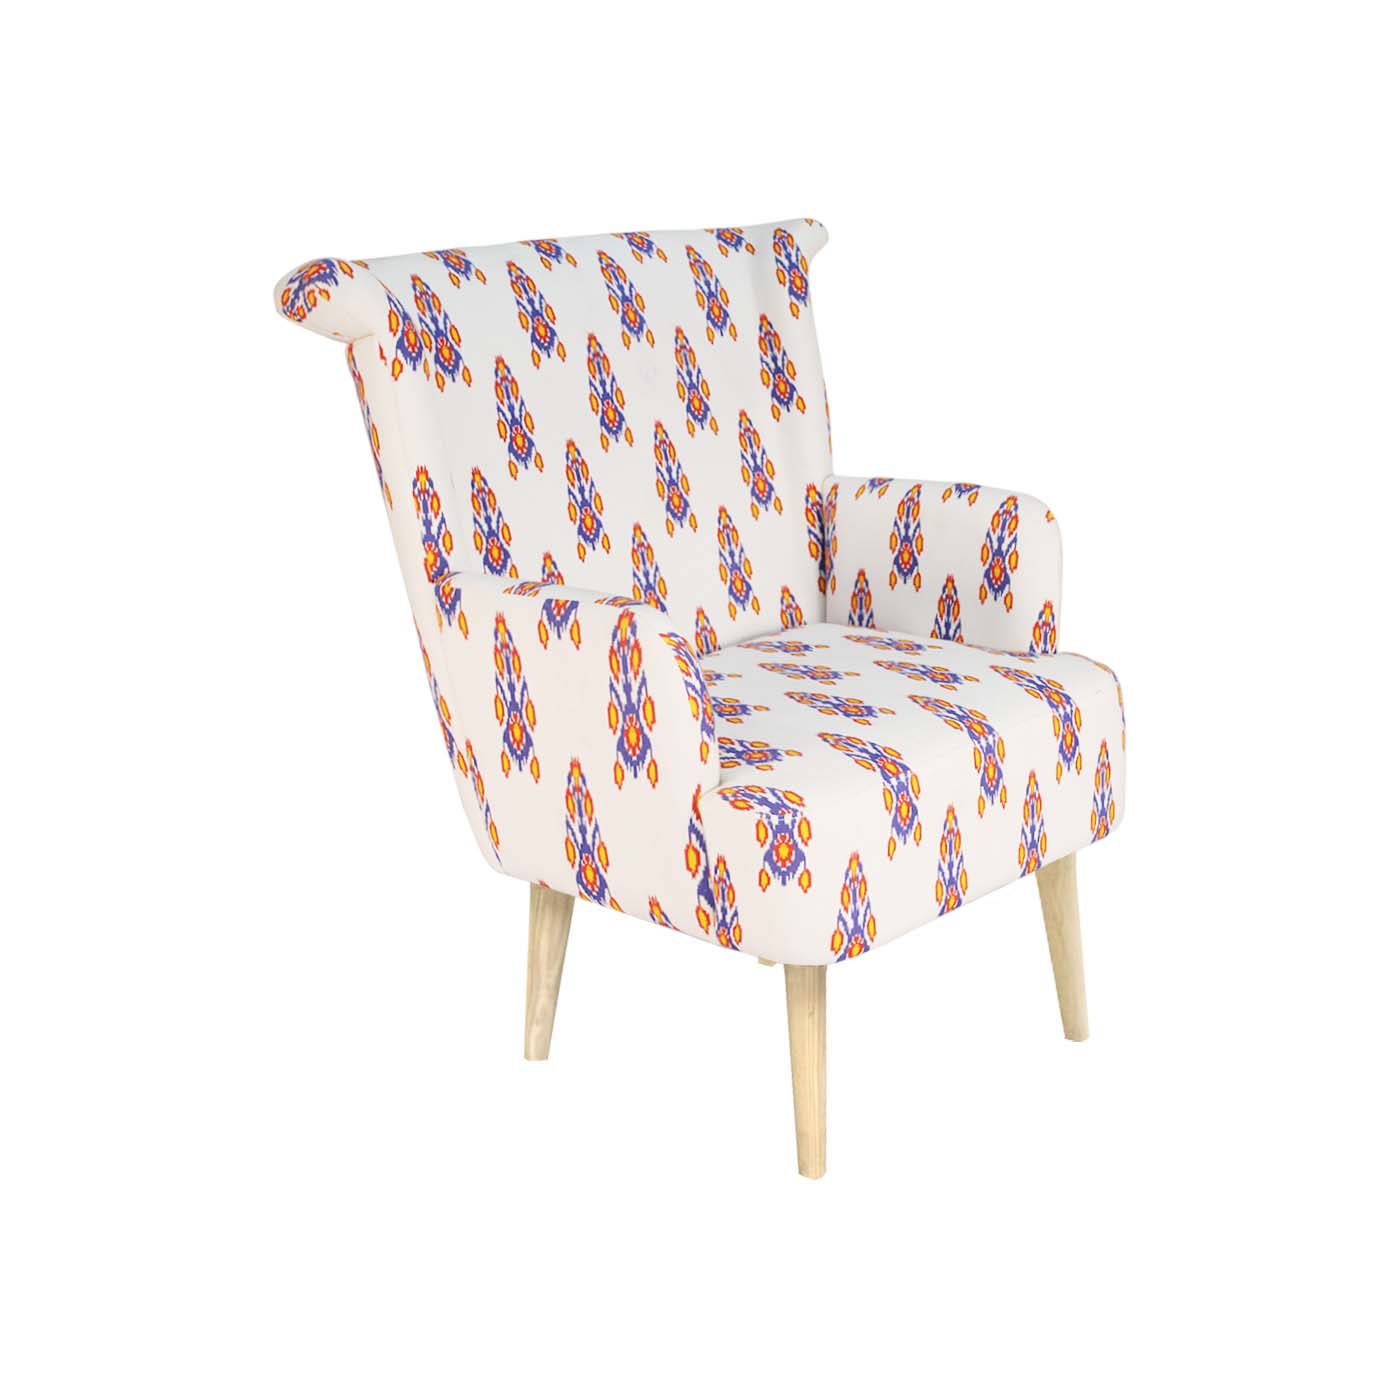 Pompeii Ikat White & Red Light Armchair (Limited Edition)